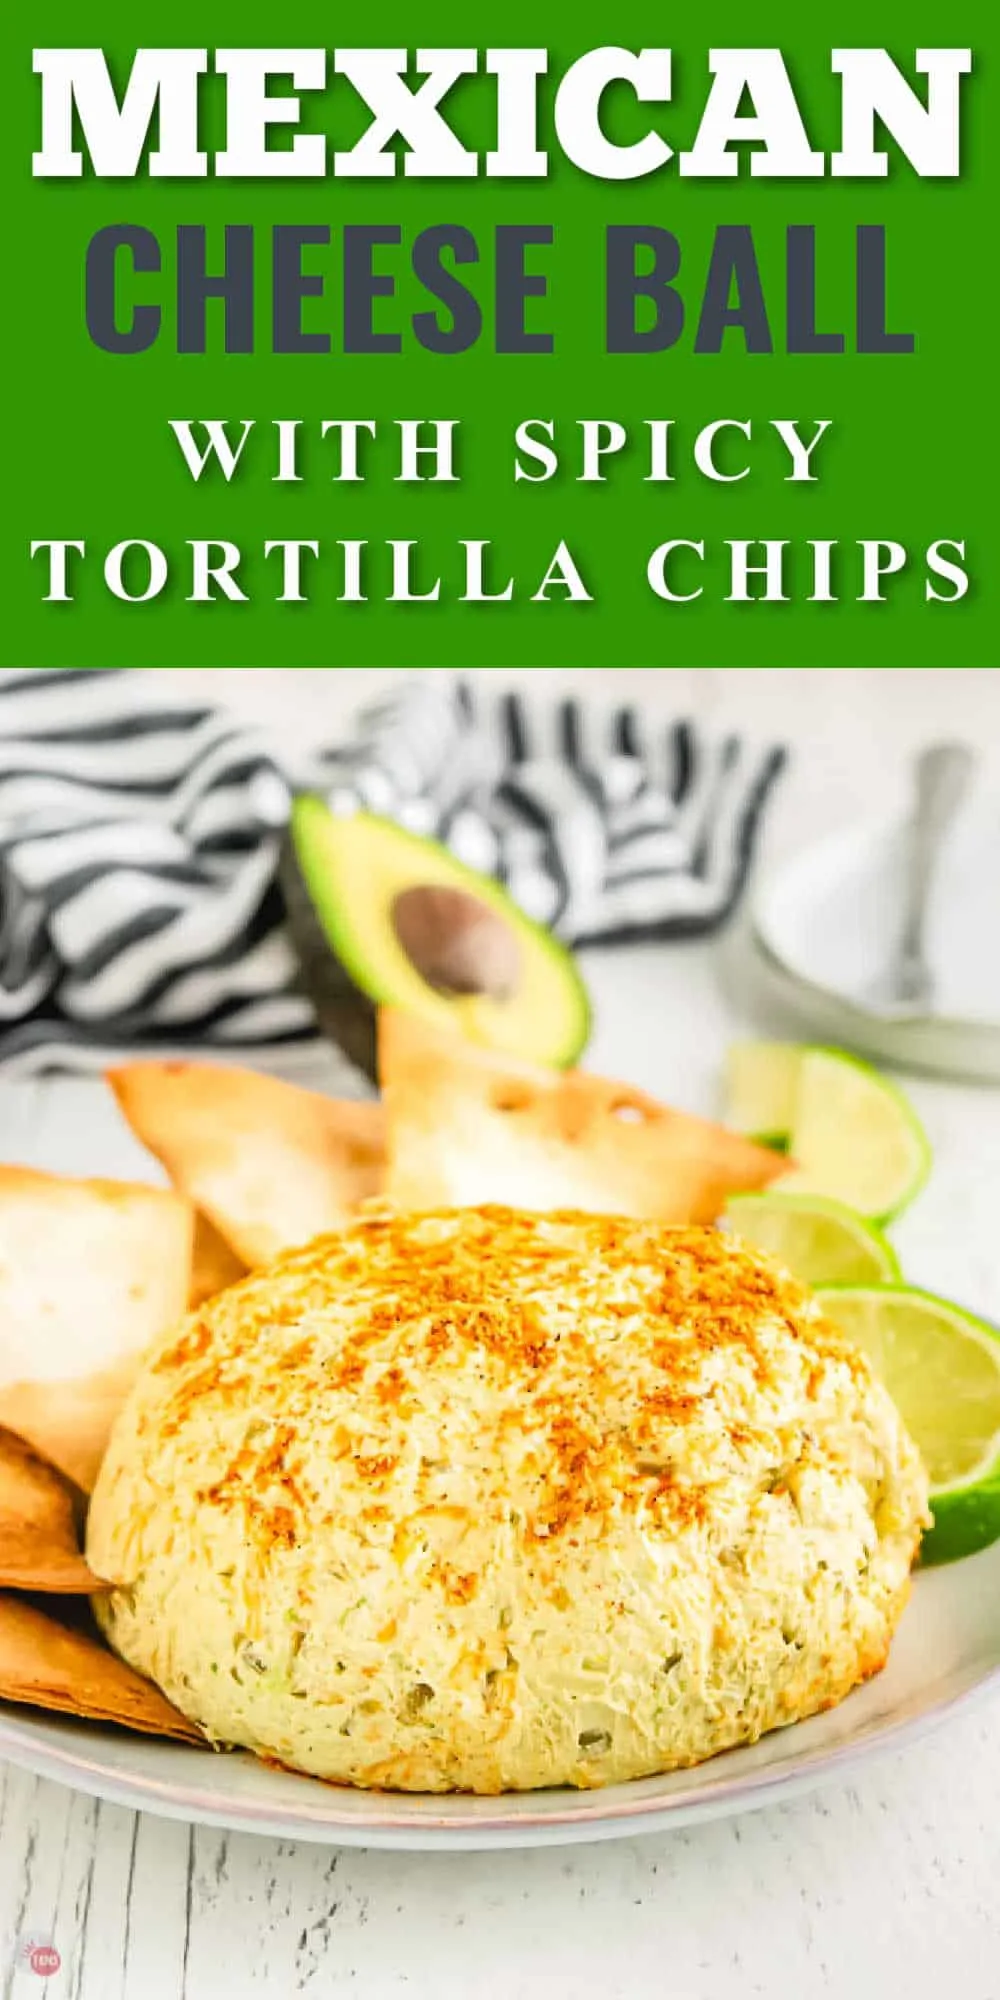 cheese ball with text "mexican cheese ball with spicy tortilla chips"